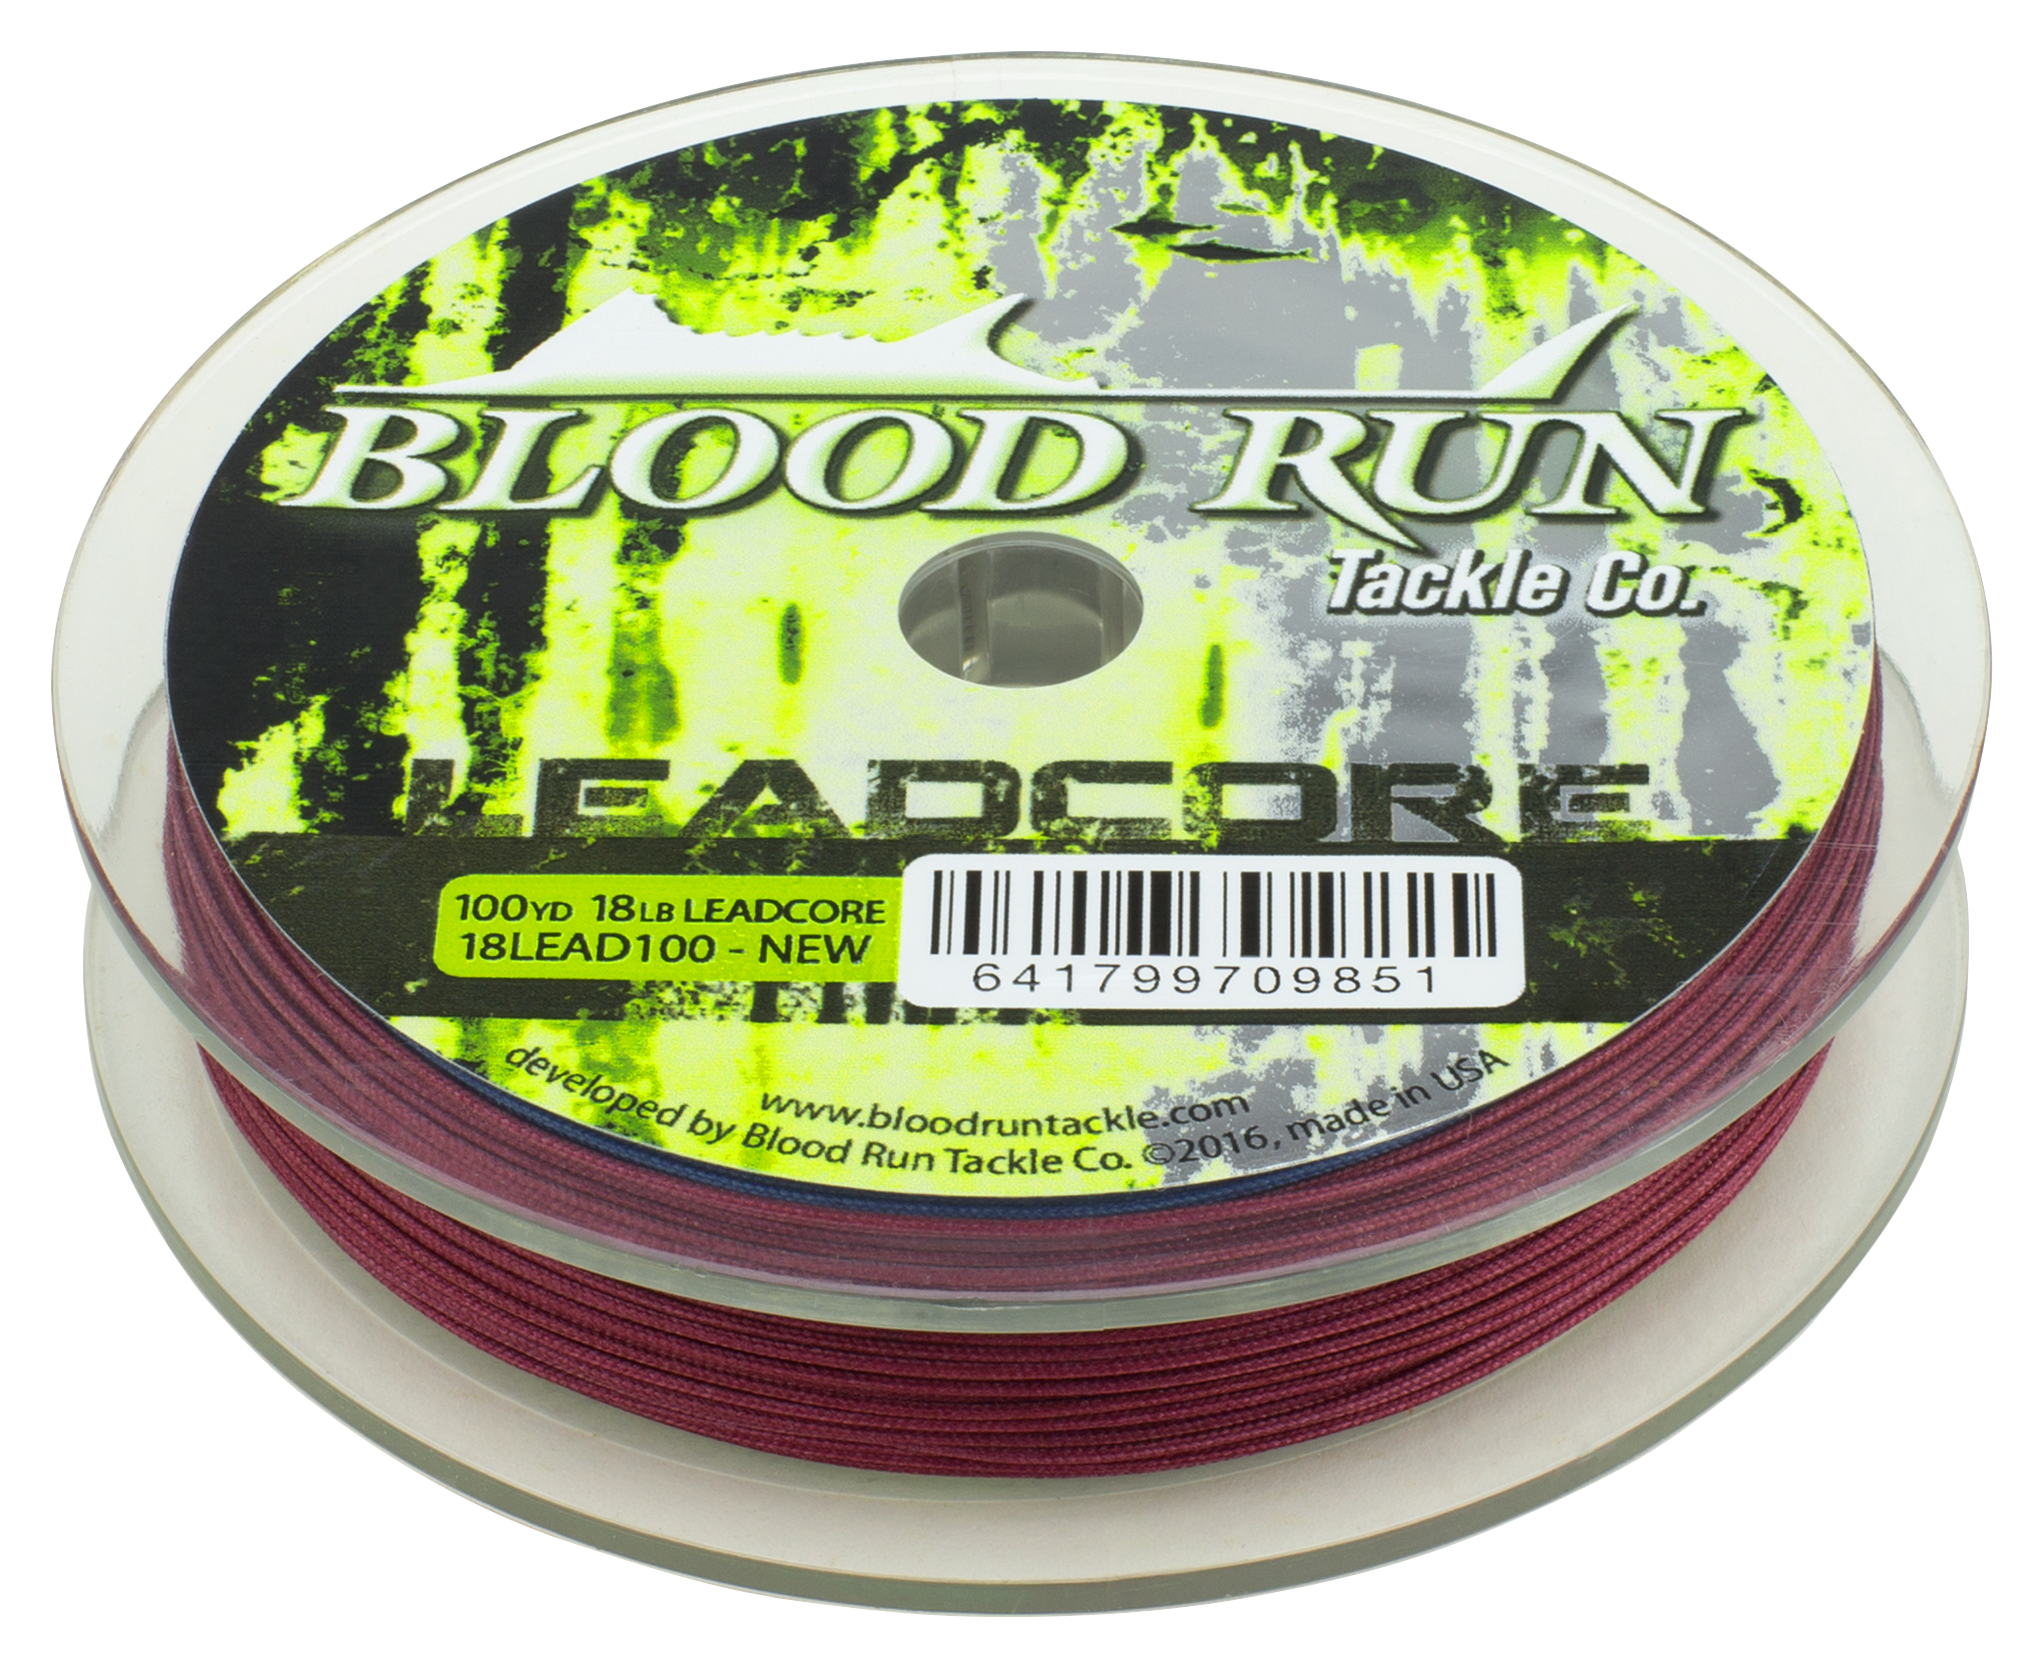 Sufix Performance Lead Core 200YDS Metered 668-MC CHOOSE YOUR LINE, lead  core fishing line 